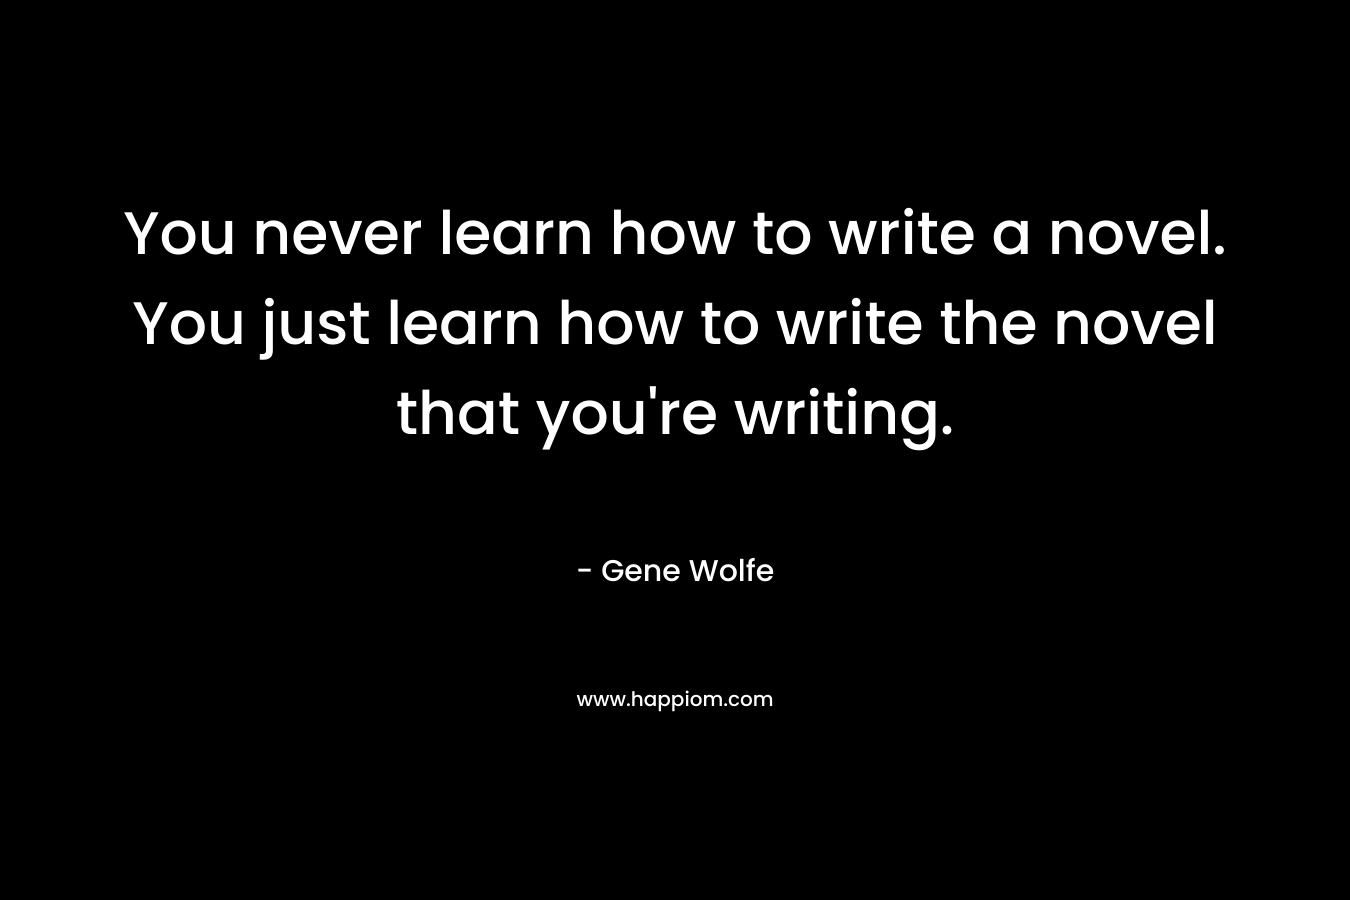 You never learn how to write a novel. You just learn how to write the novel that you’re writing. – Gene Wolfe